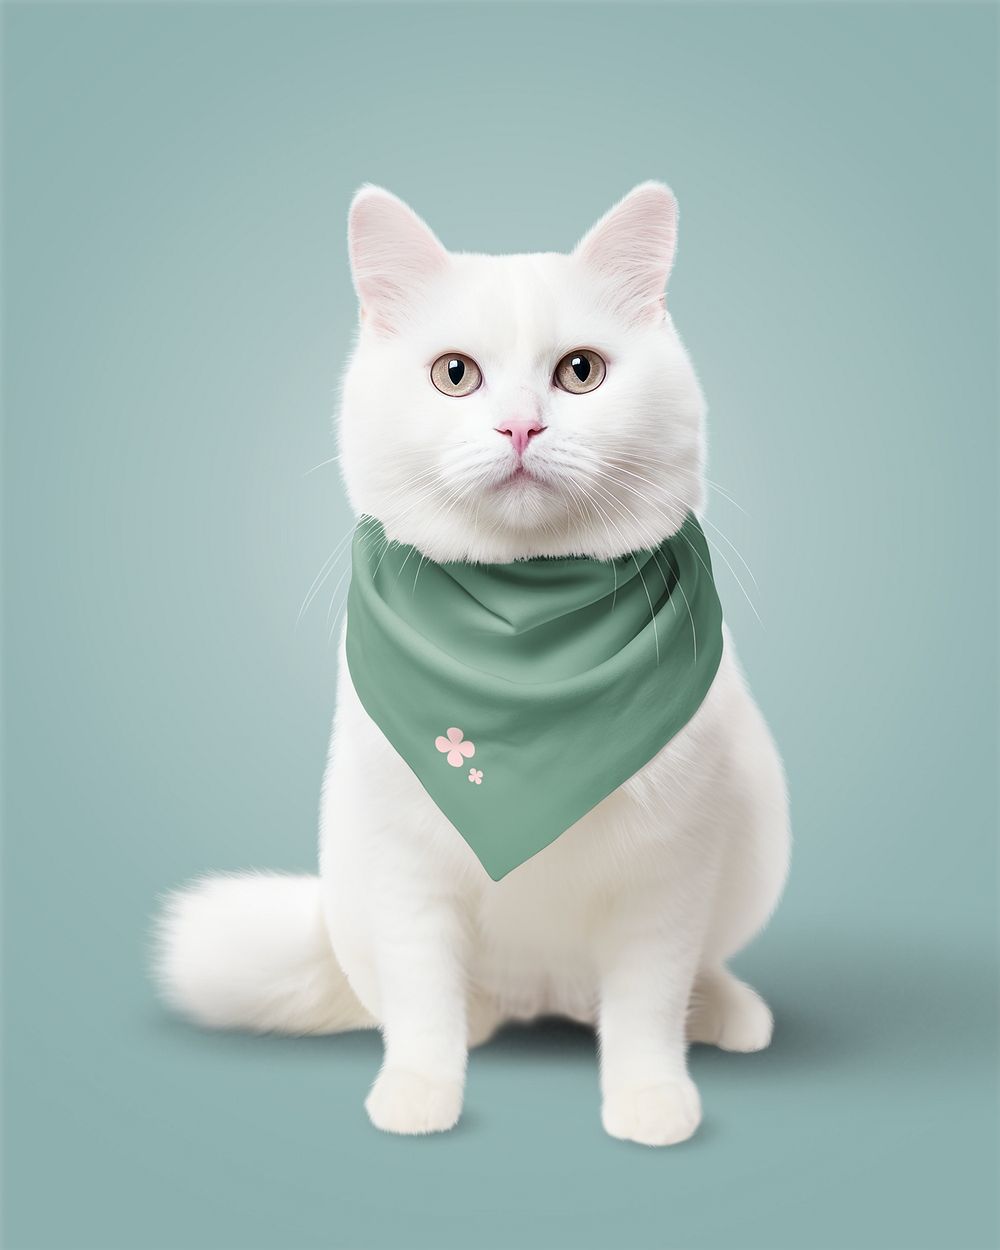 White cat with green scarf